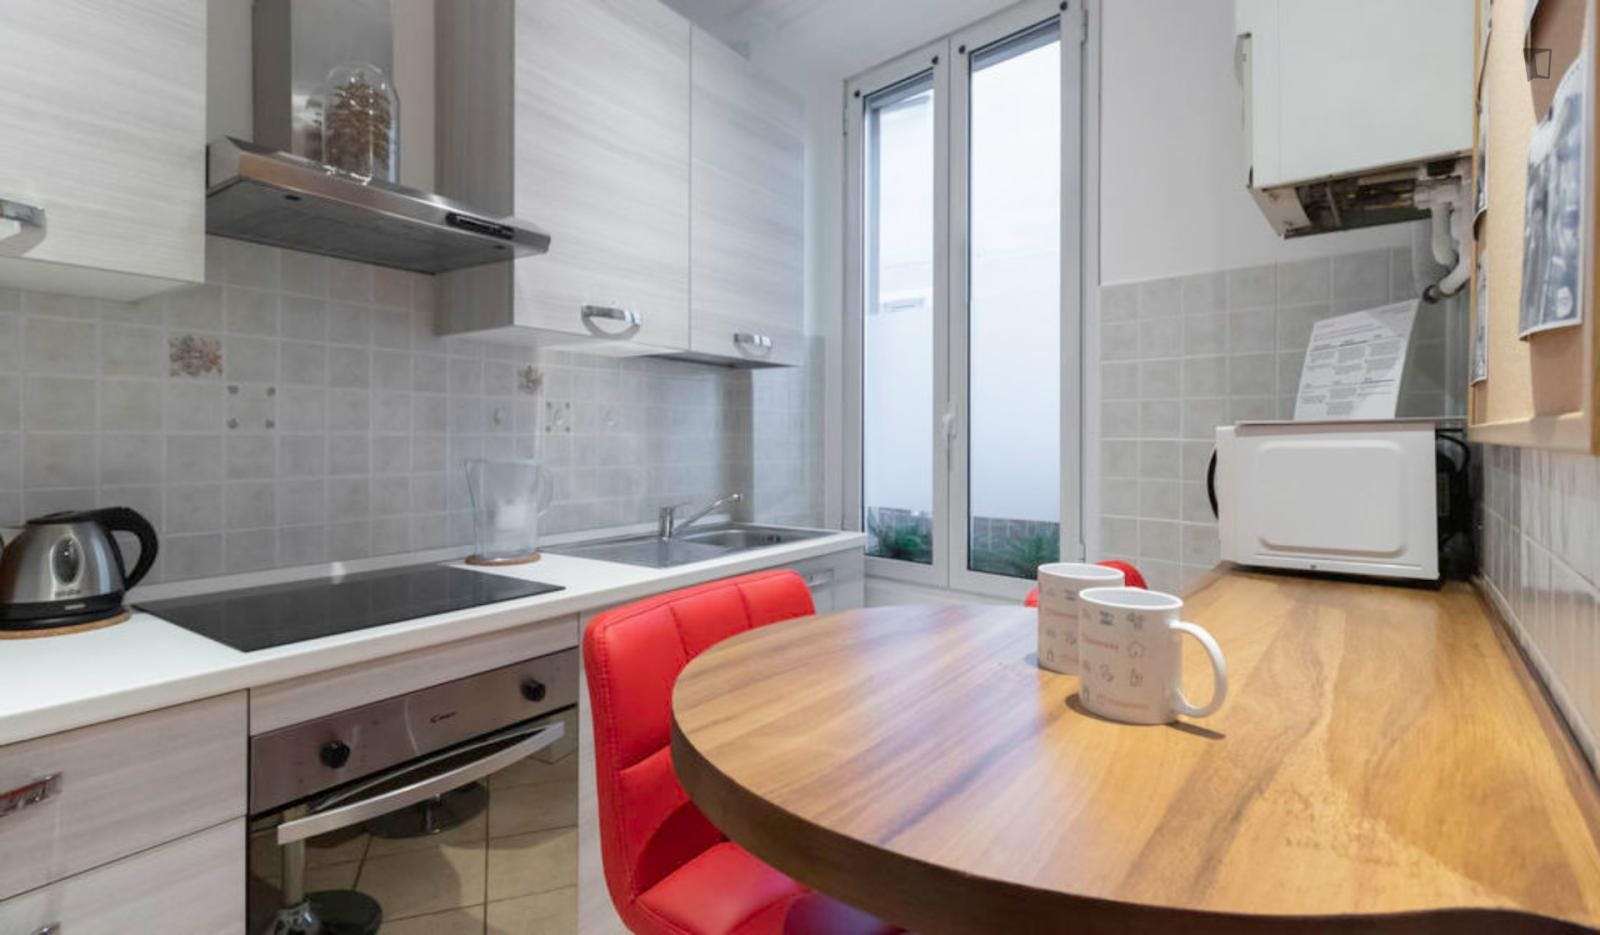 Welcoming 2-bedroom apartment near the Monza train station